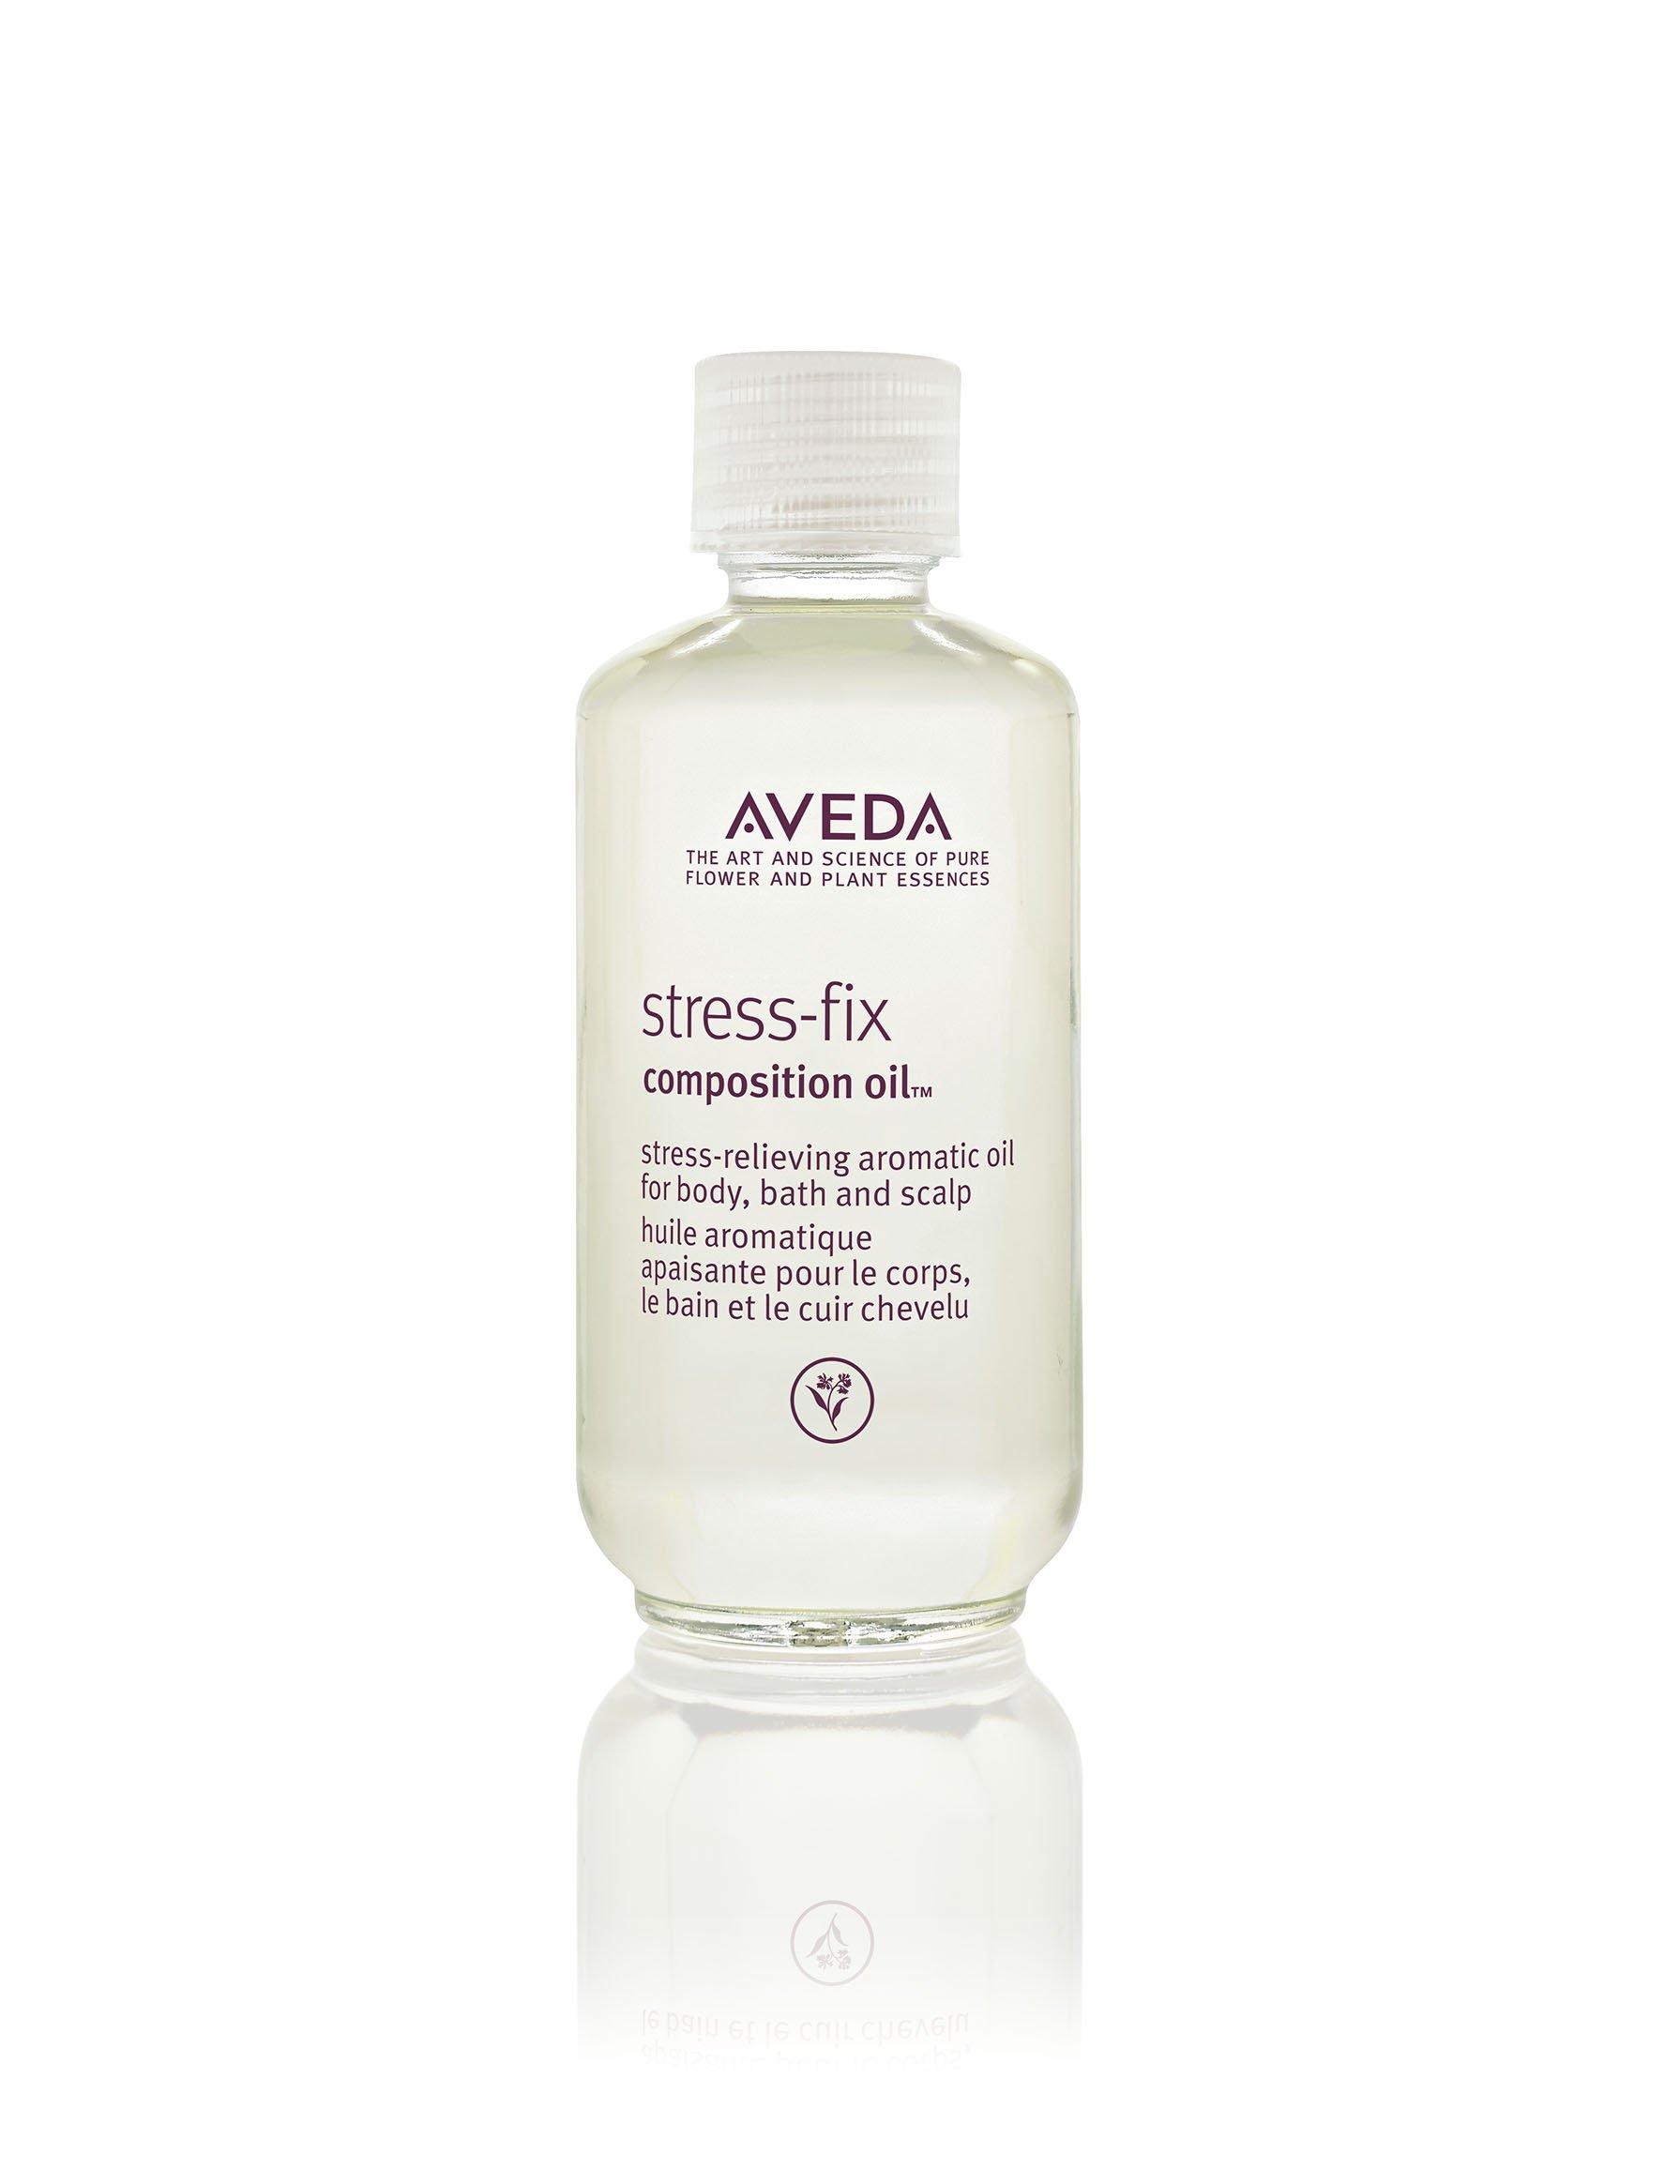 Image of AVEDA Stress-fix composition oil? - 50ml